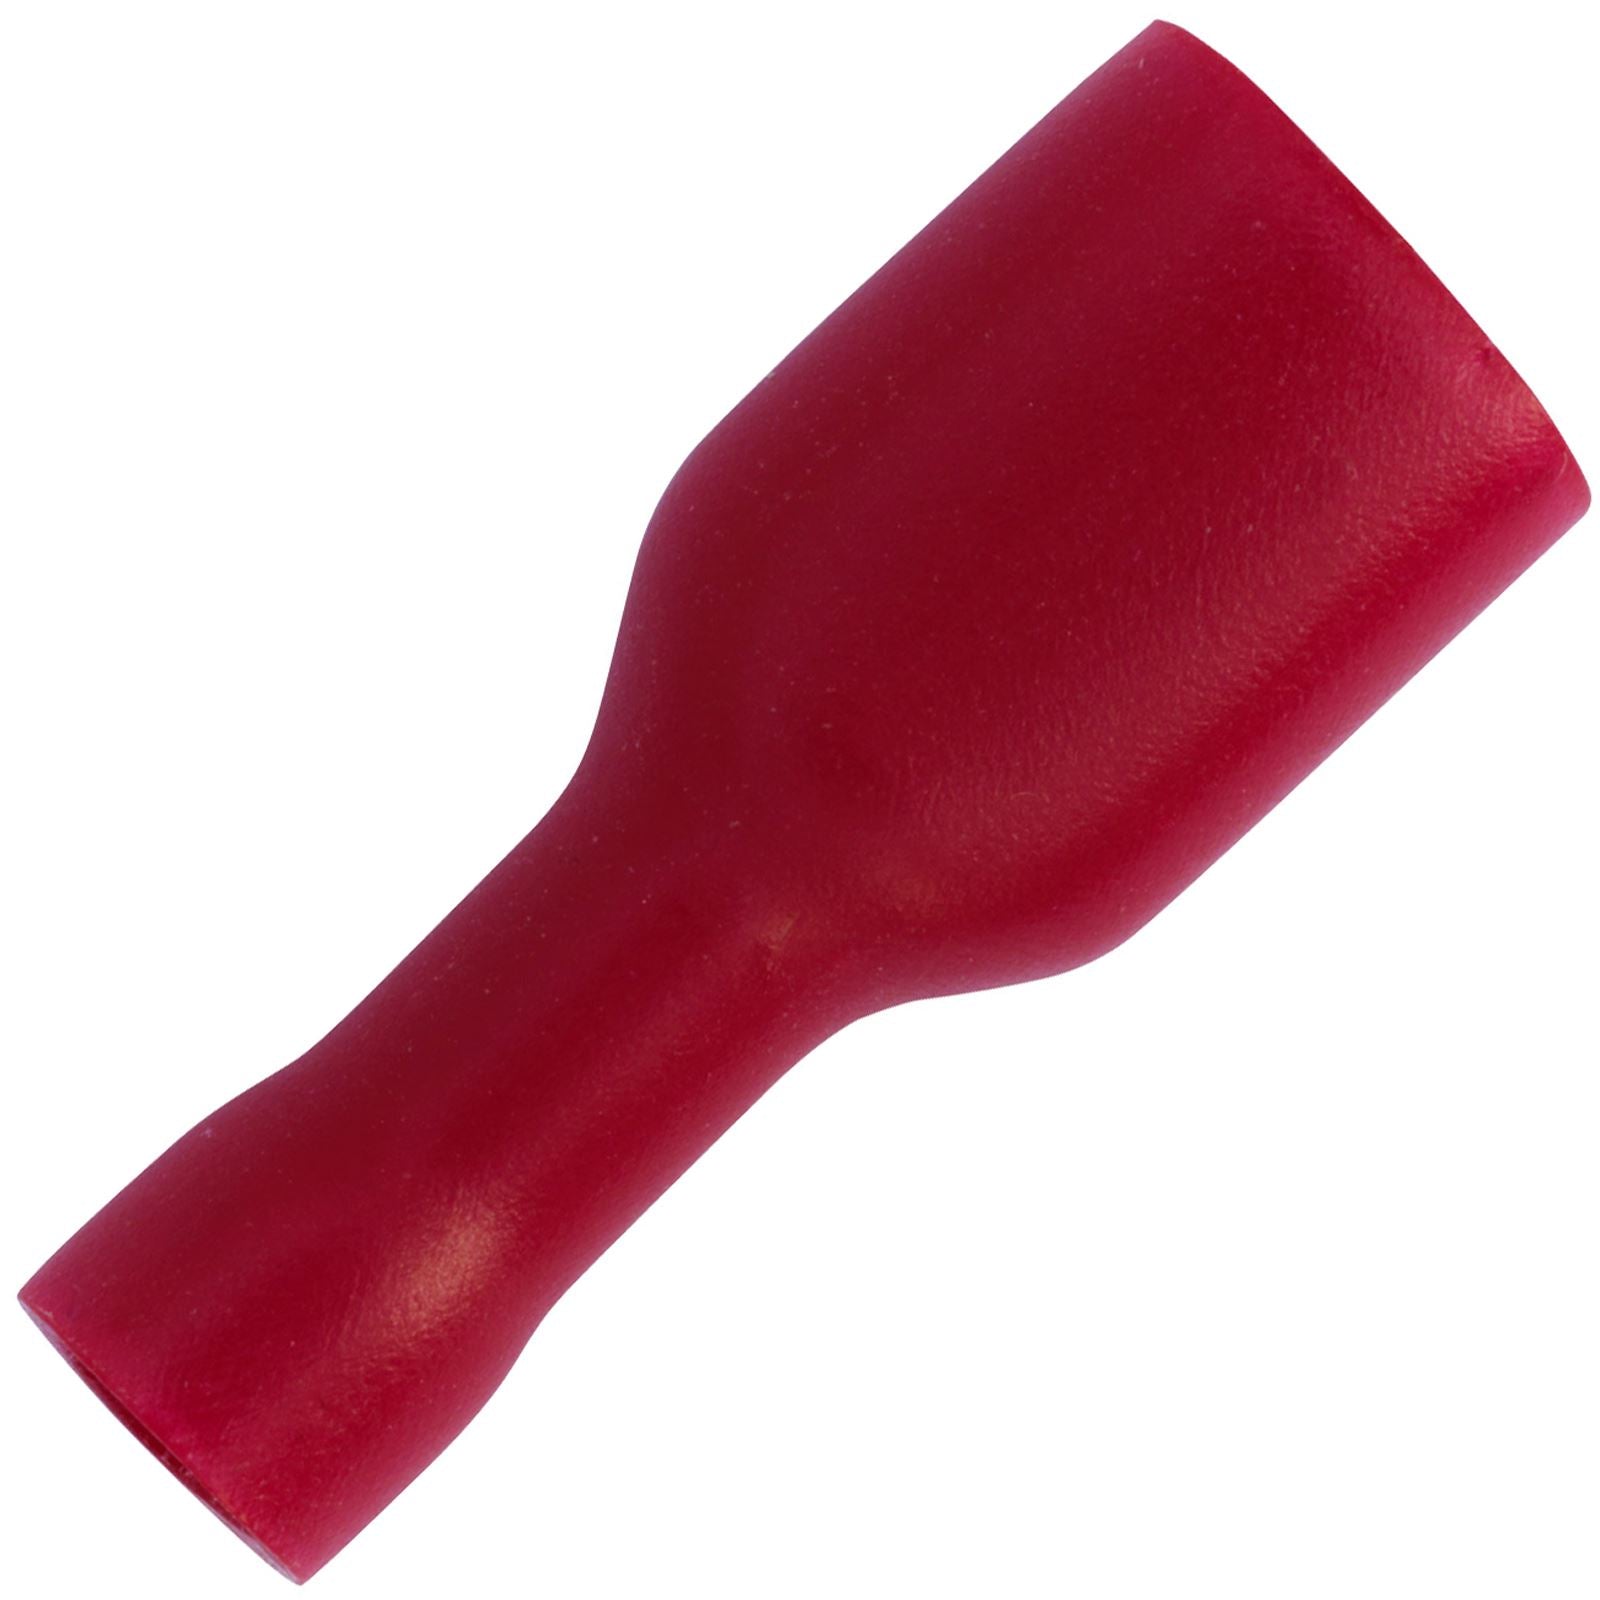 Sealey 100 Pack 6.3mm Red Fully Insulated Terminal